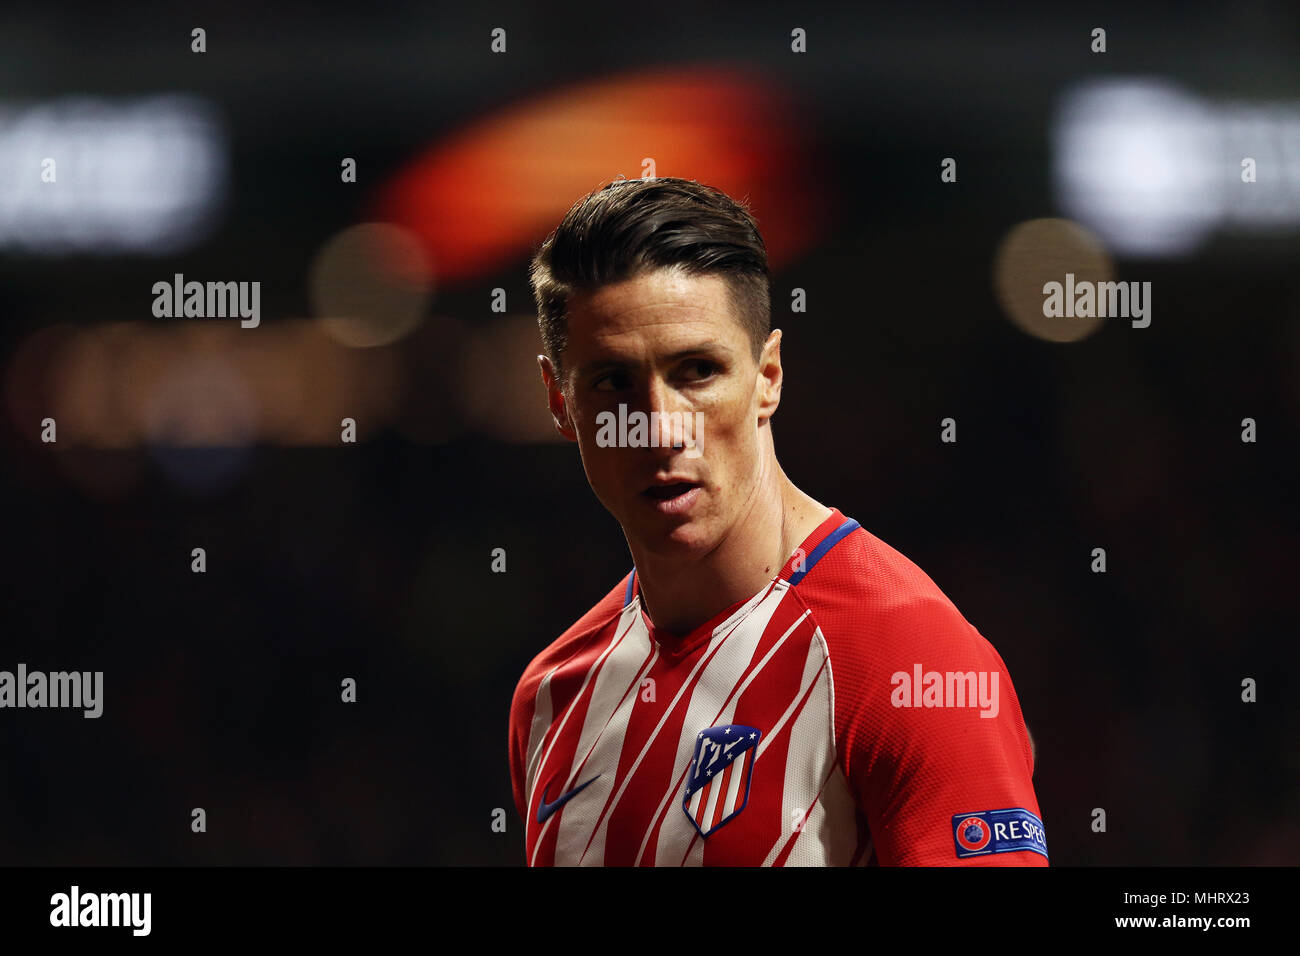 Madrid, Spain. 3rd May 2018. Fernando Torres (Club Atletico de Madrid) seen during the UEFA Europa League Semi Final Second Leg match between  Atletico de Madrid and Arsenal FC at the Wanda Metropolitano Stadium in Madrid, Spain. Final Score (Atletico de Madrid 1-0 Arsenal FC). Credit: SOPA Images Limited/Alamy Live News Stock Photo